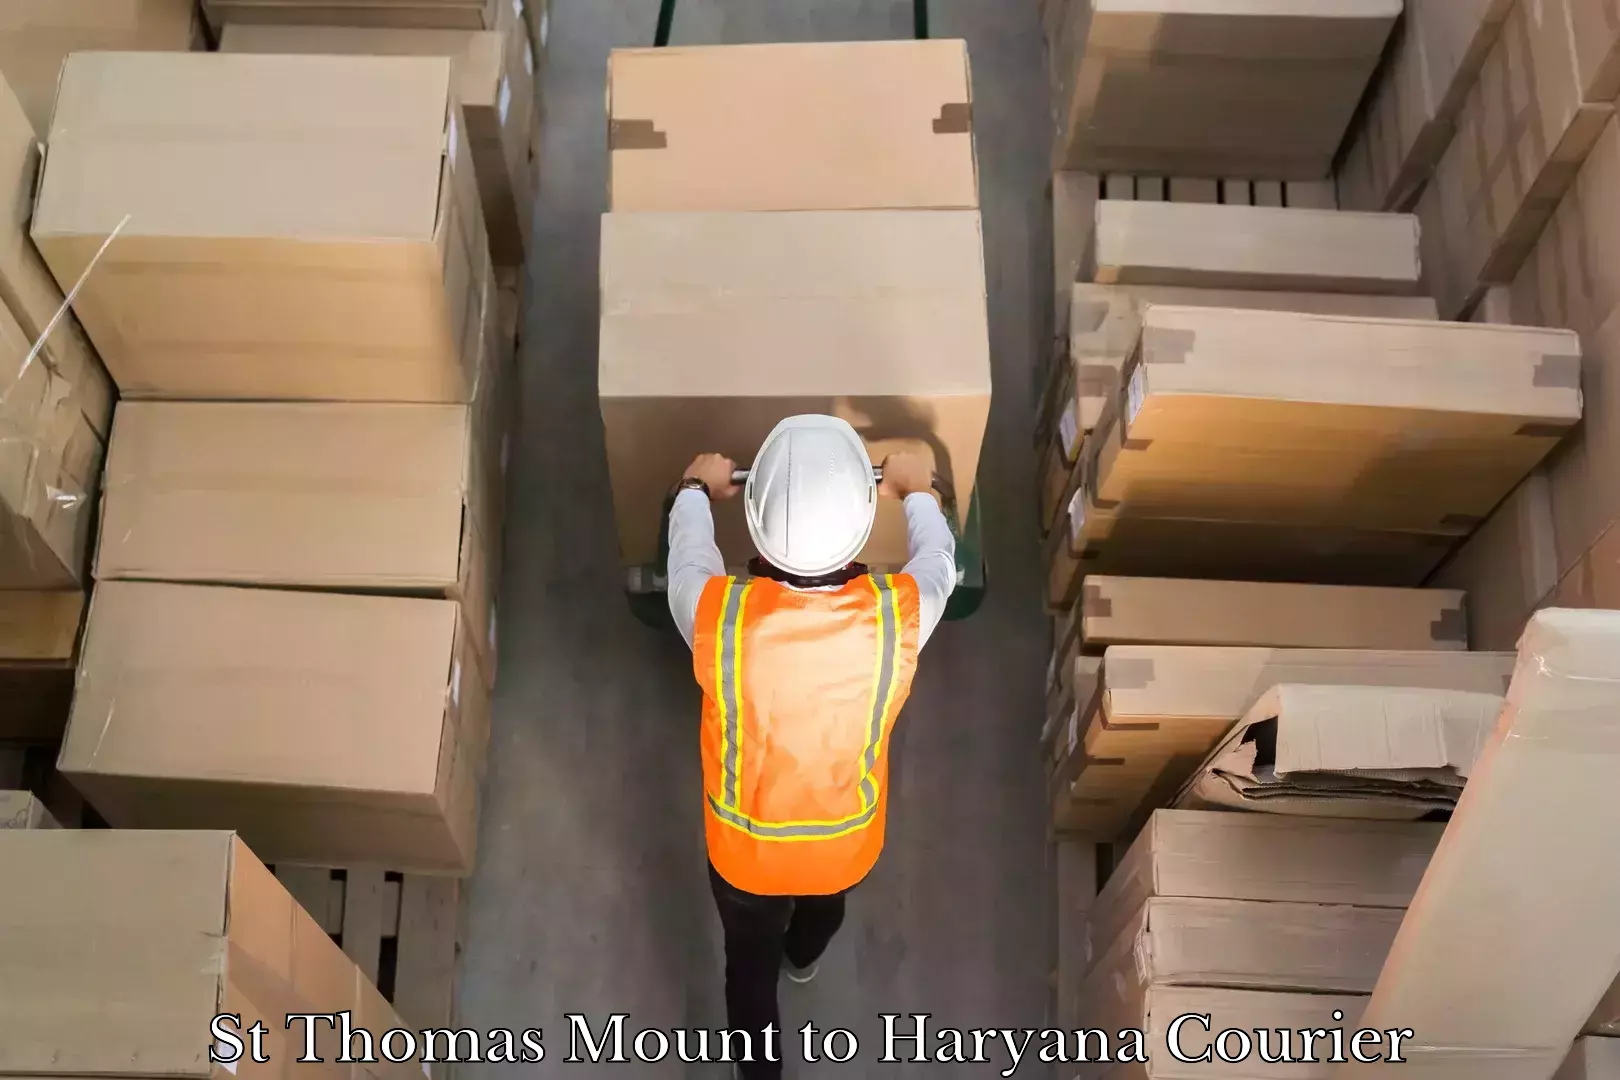 Professional courier handling St Thomas Mount to Haryana